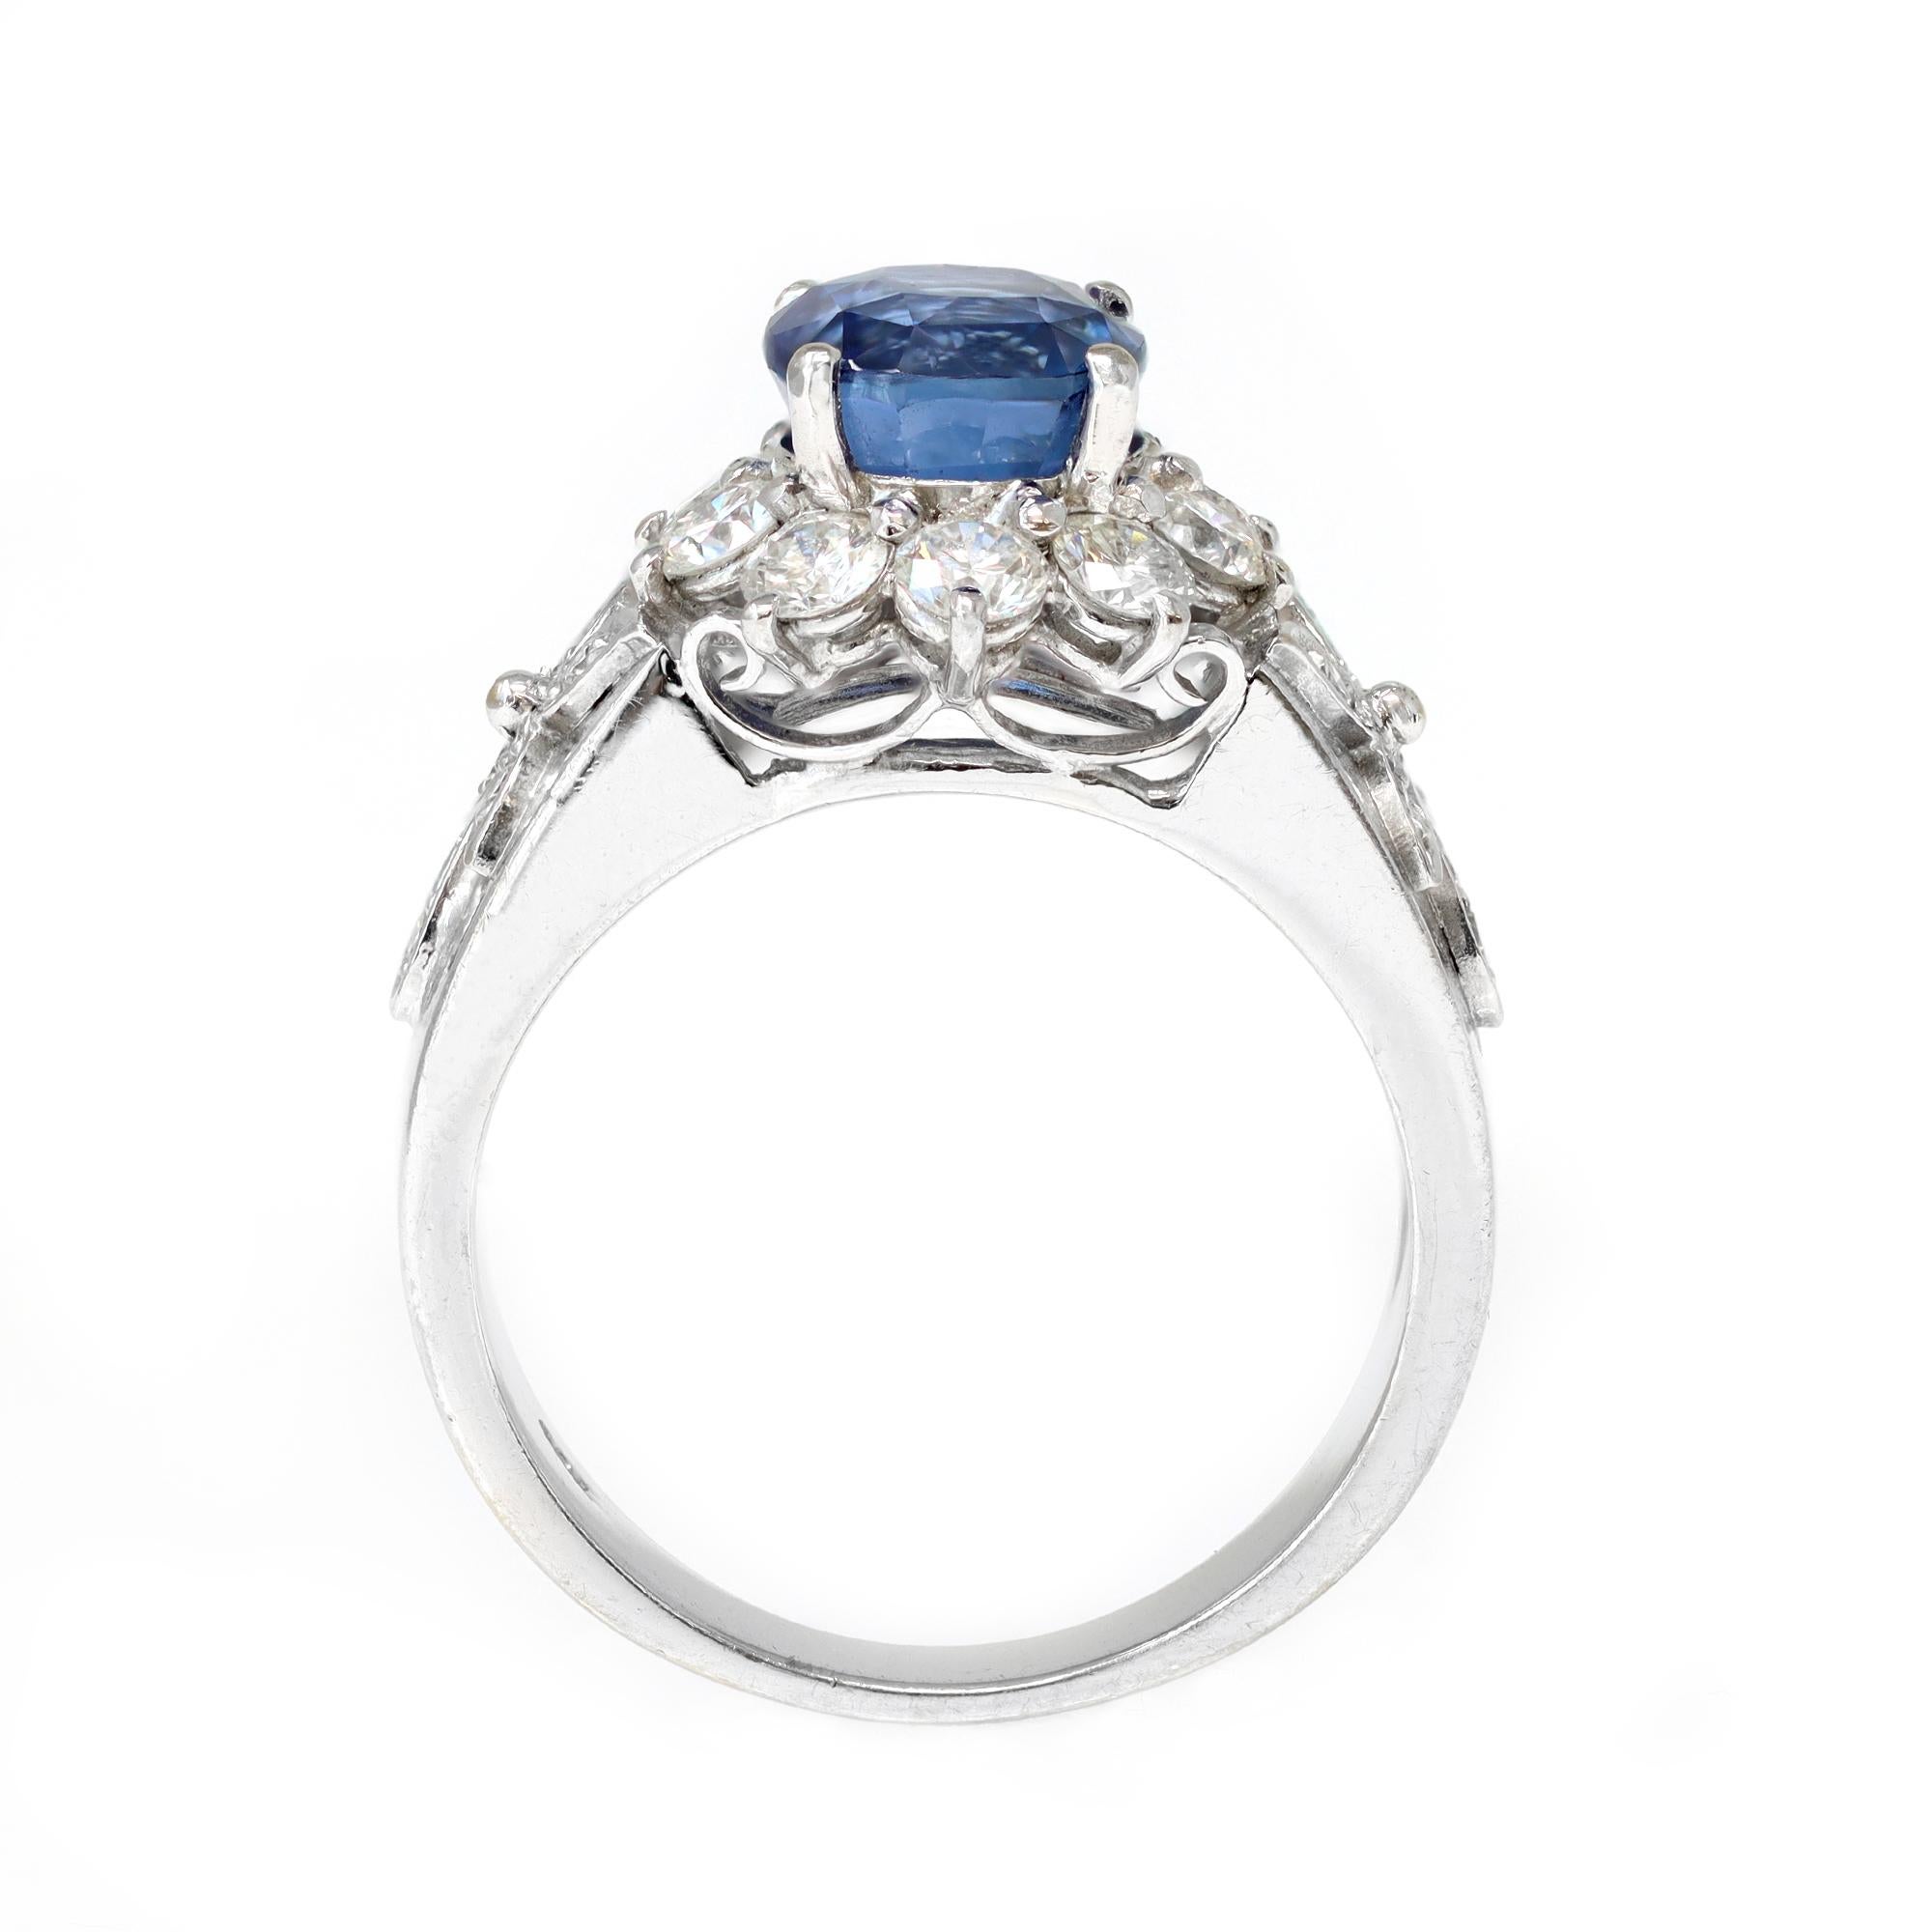 A classic with a modern touch Sapphire and diamond cocktail ring circa 1980. The ring is set in 18 karat white gold and features a vivid blue natural sapphire, oval shape, weighing approximately 3 carats. It is surrounded by a halo of diamonds and